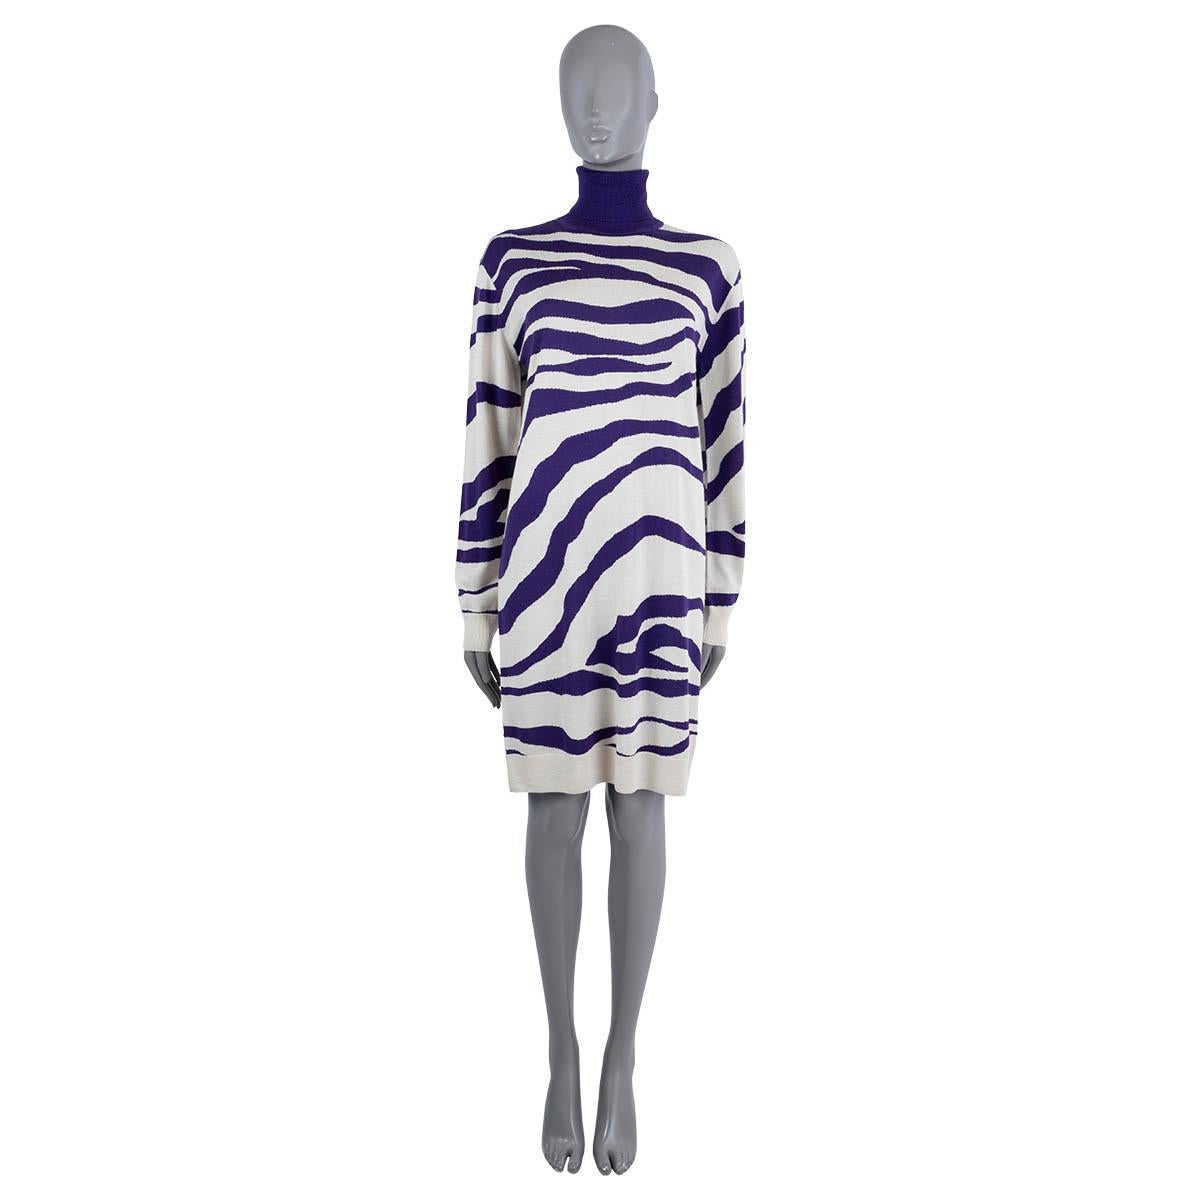 100% authentic Dries van Noten Nayeli knit dress in purple and ivory zebra-print merino wool (100%). Features a turtleneck and rib-knit hem and cuffs. Has been worn and is in excellent condition. 

2022 Spring/Summer

Measurements
Tag